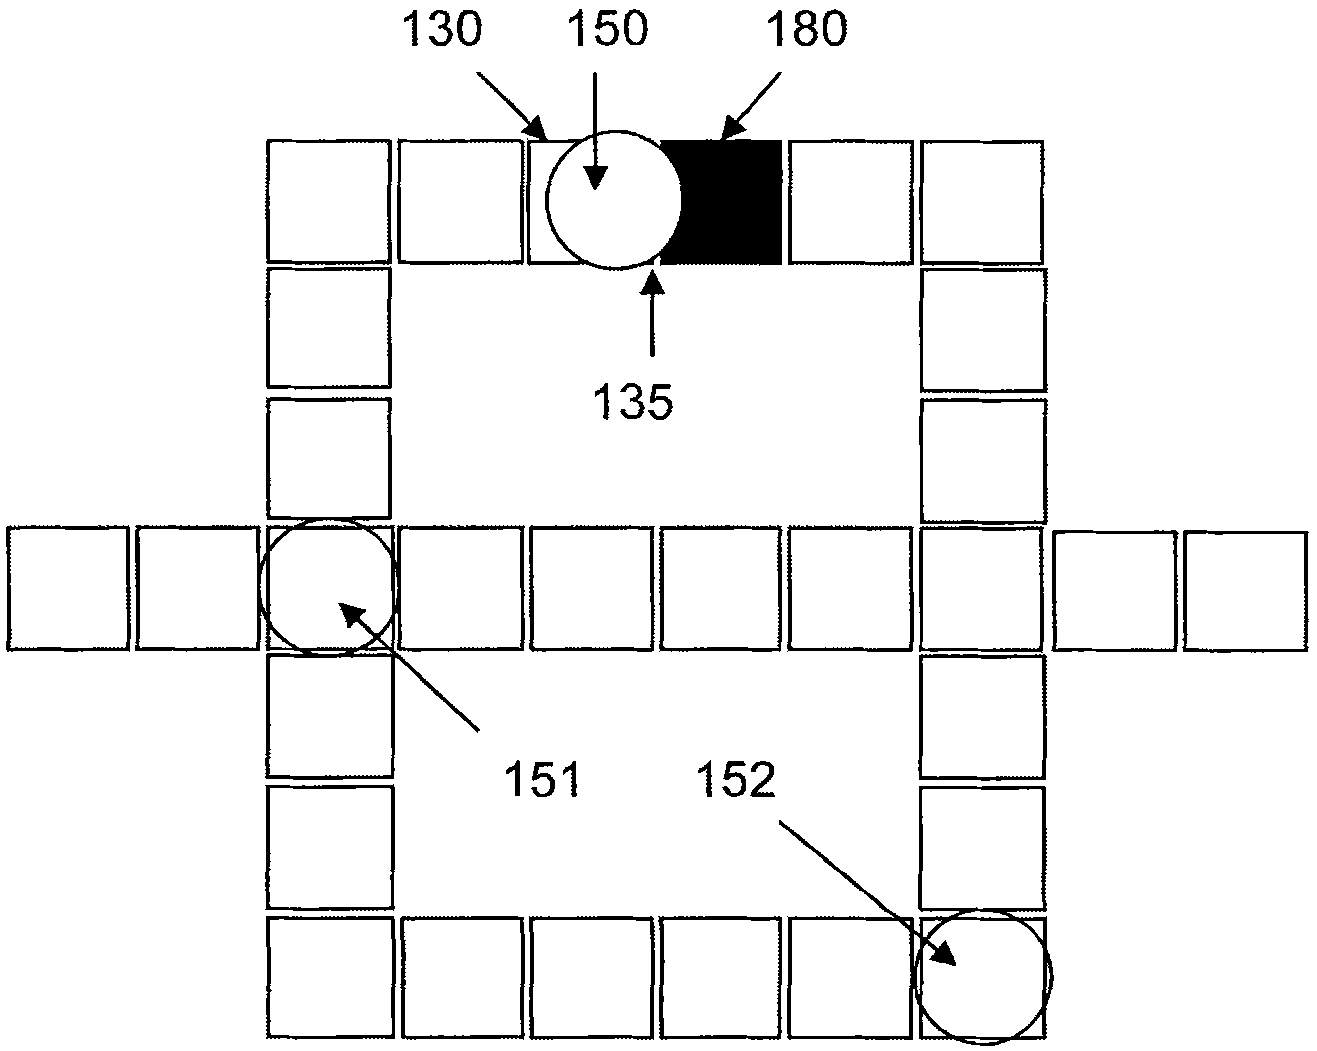 Microelectrode array architecture